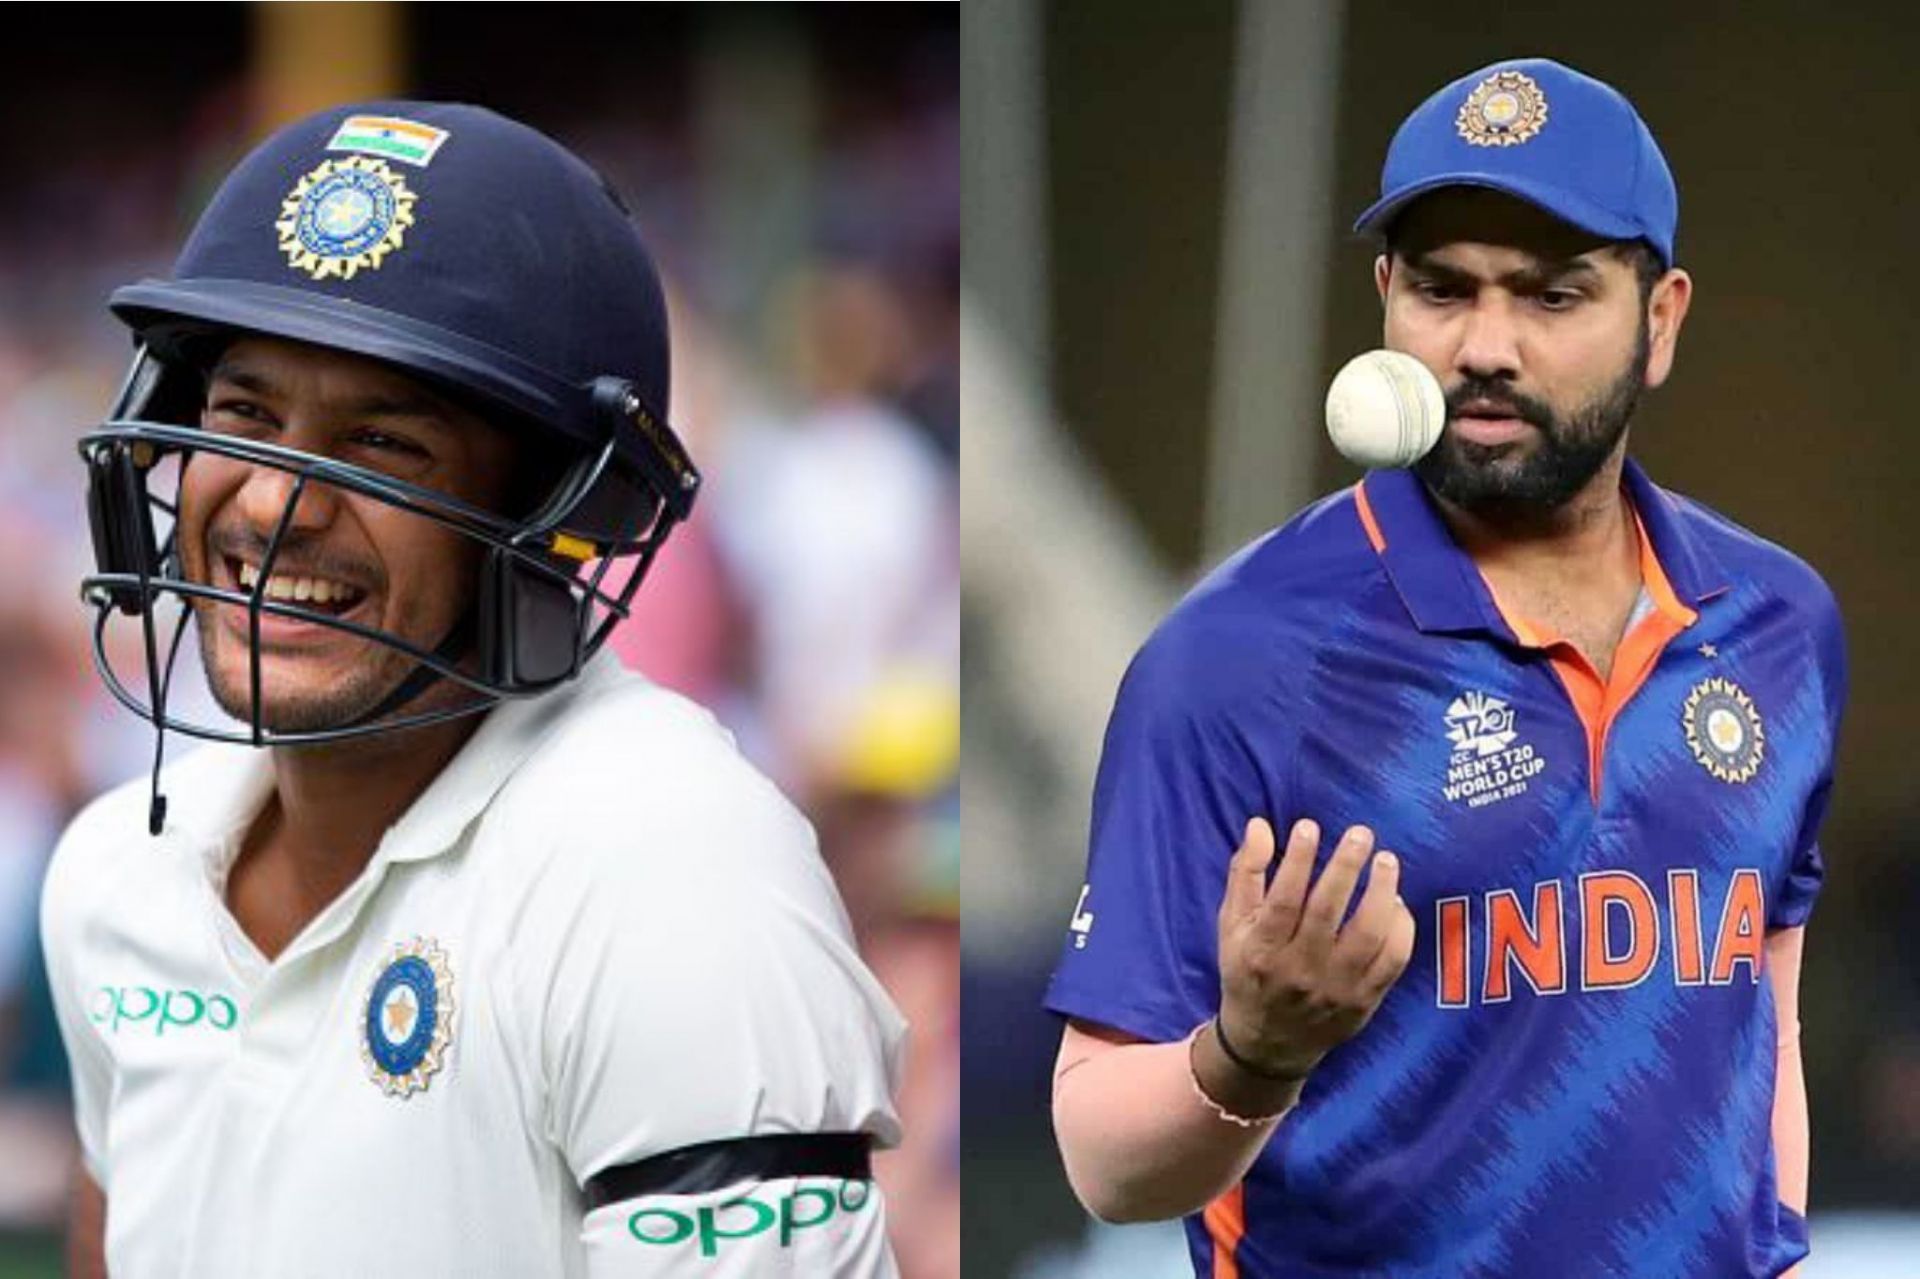 Mayank Agarwal is excited to see Rohit Sharma as the Indian T20I skipper.